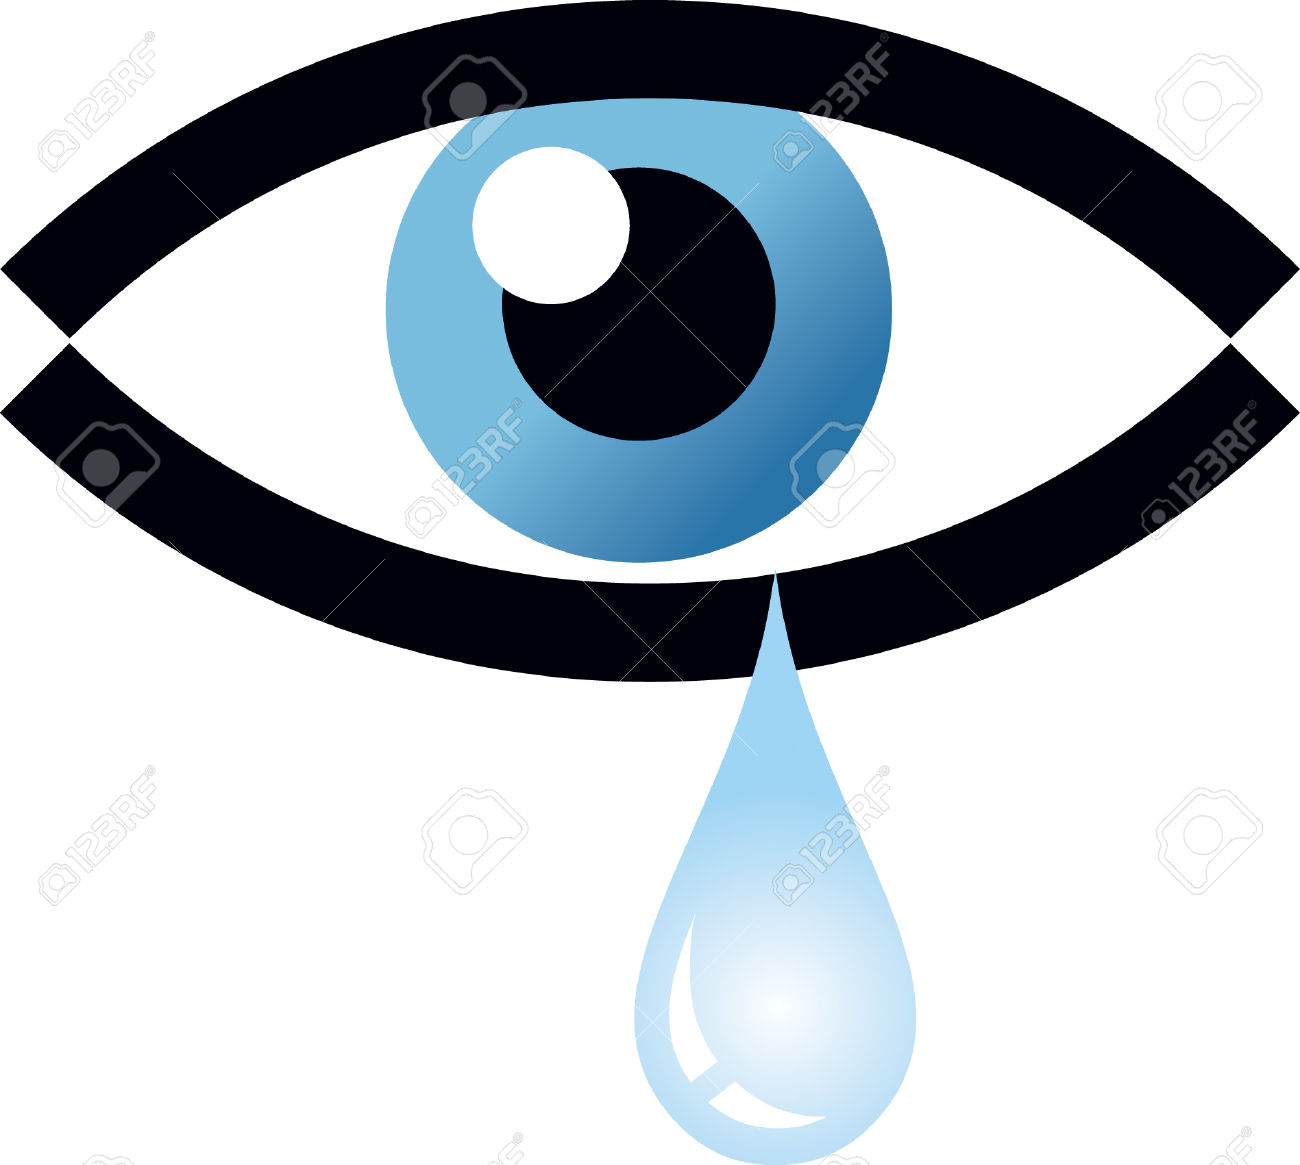 Eye Tear Royalty Free Cliparts, Vectors, And Stock Illustration.